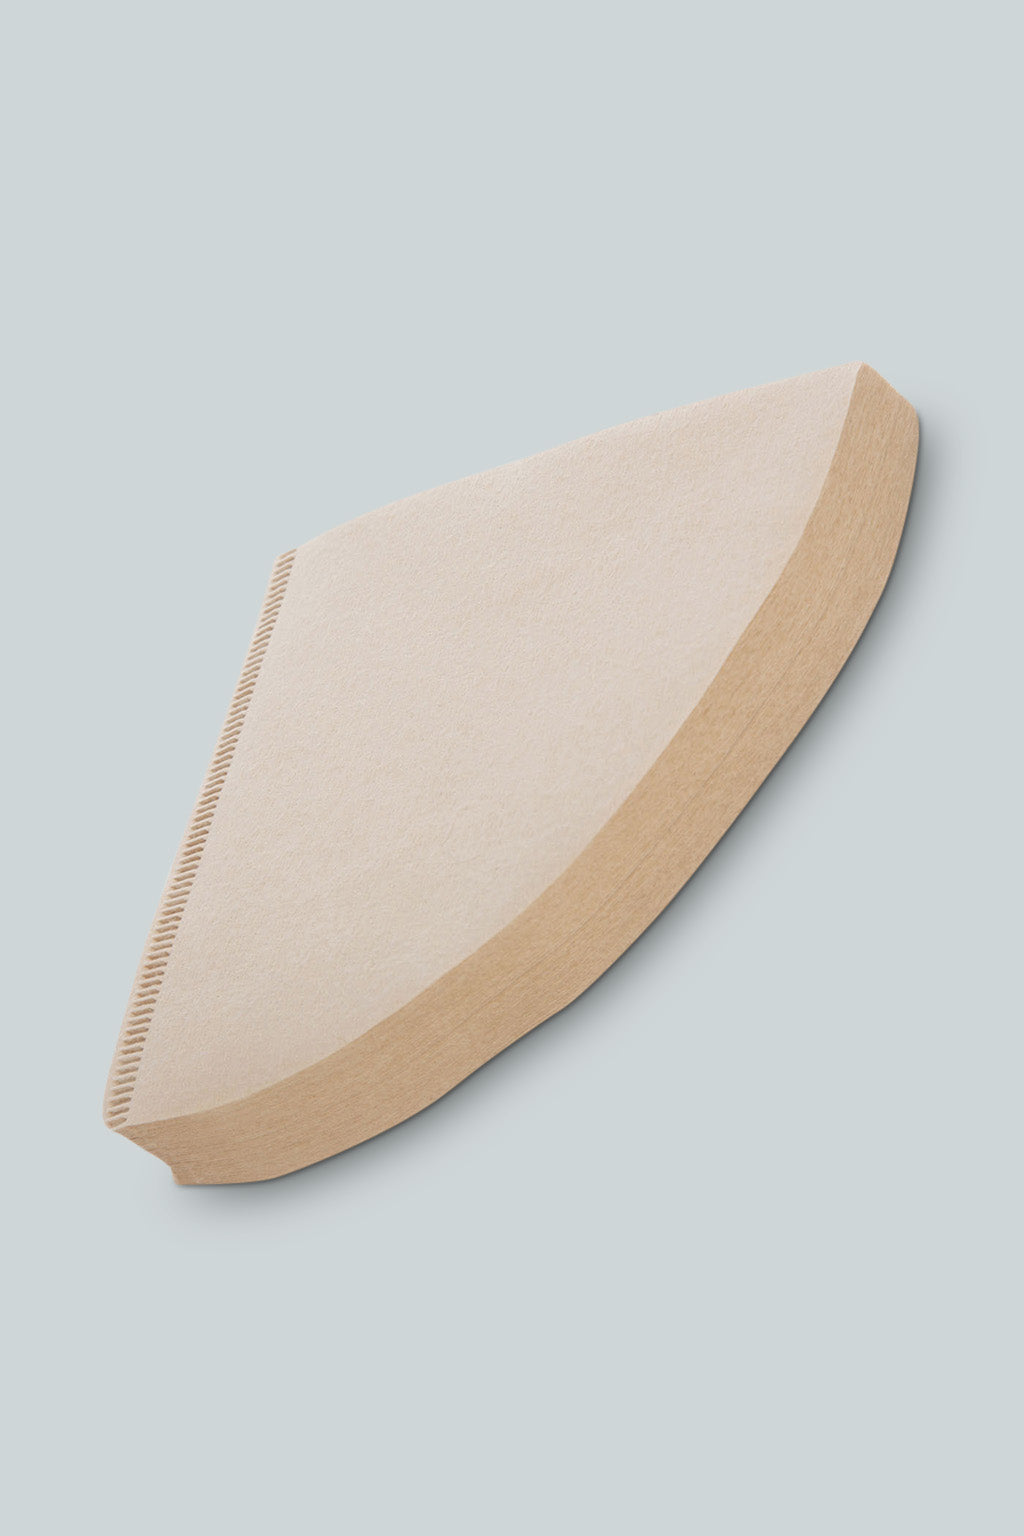 Hario V60 Brown Coffee Filter Papers Size 02